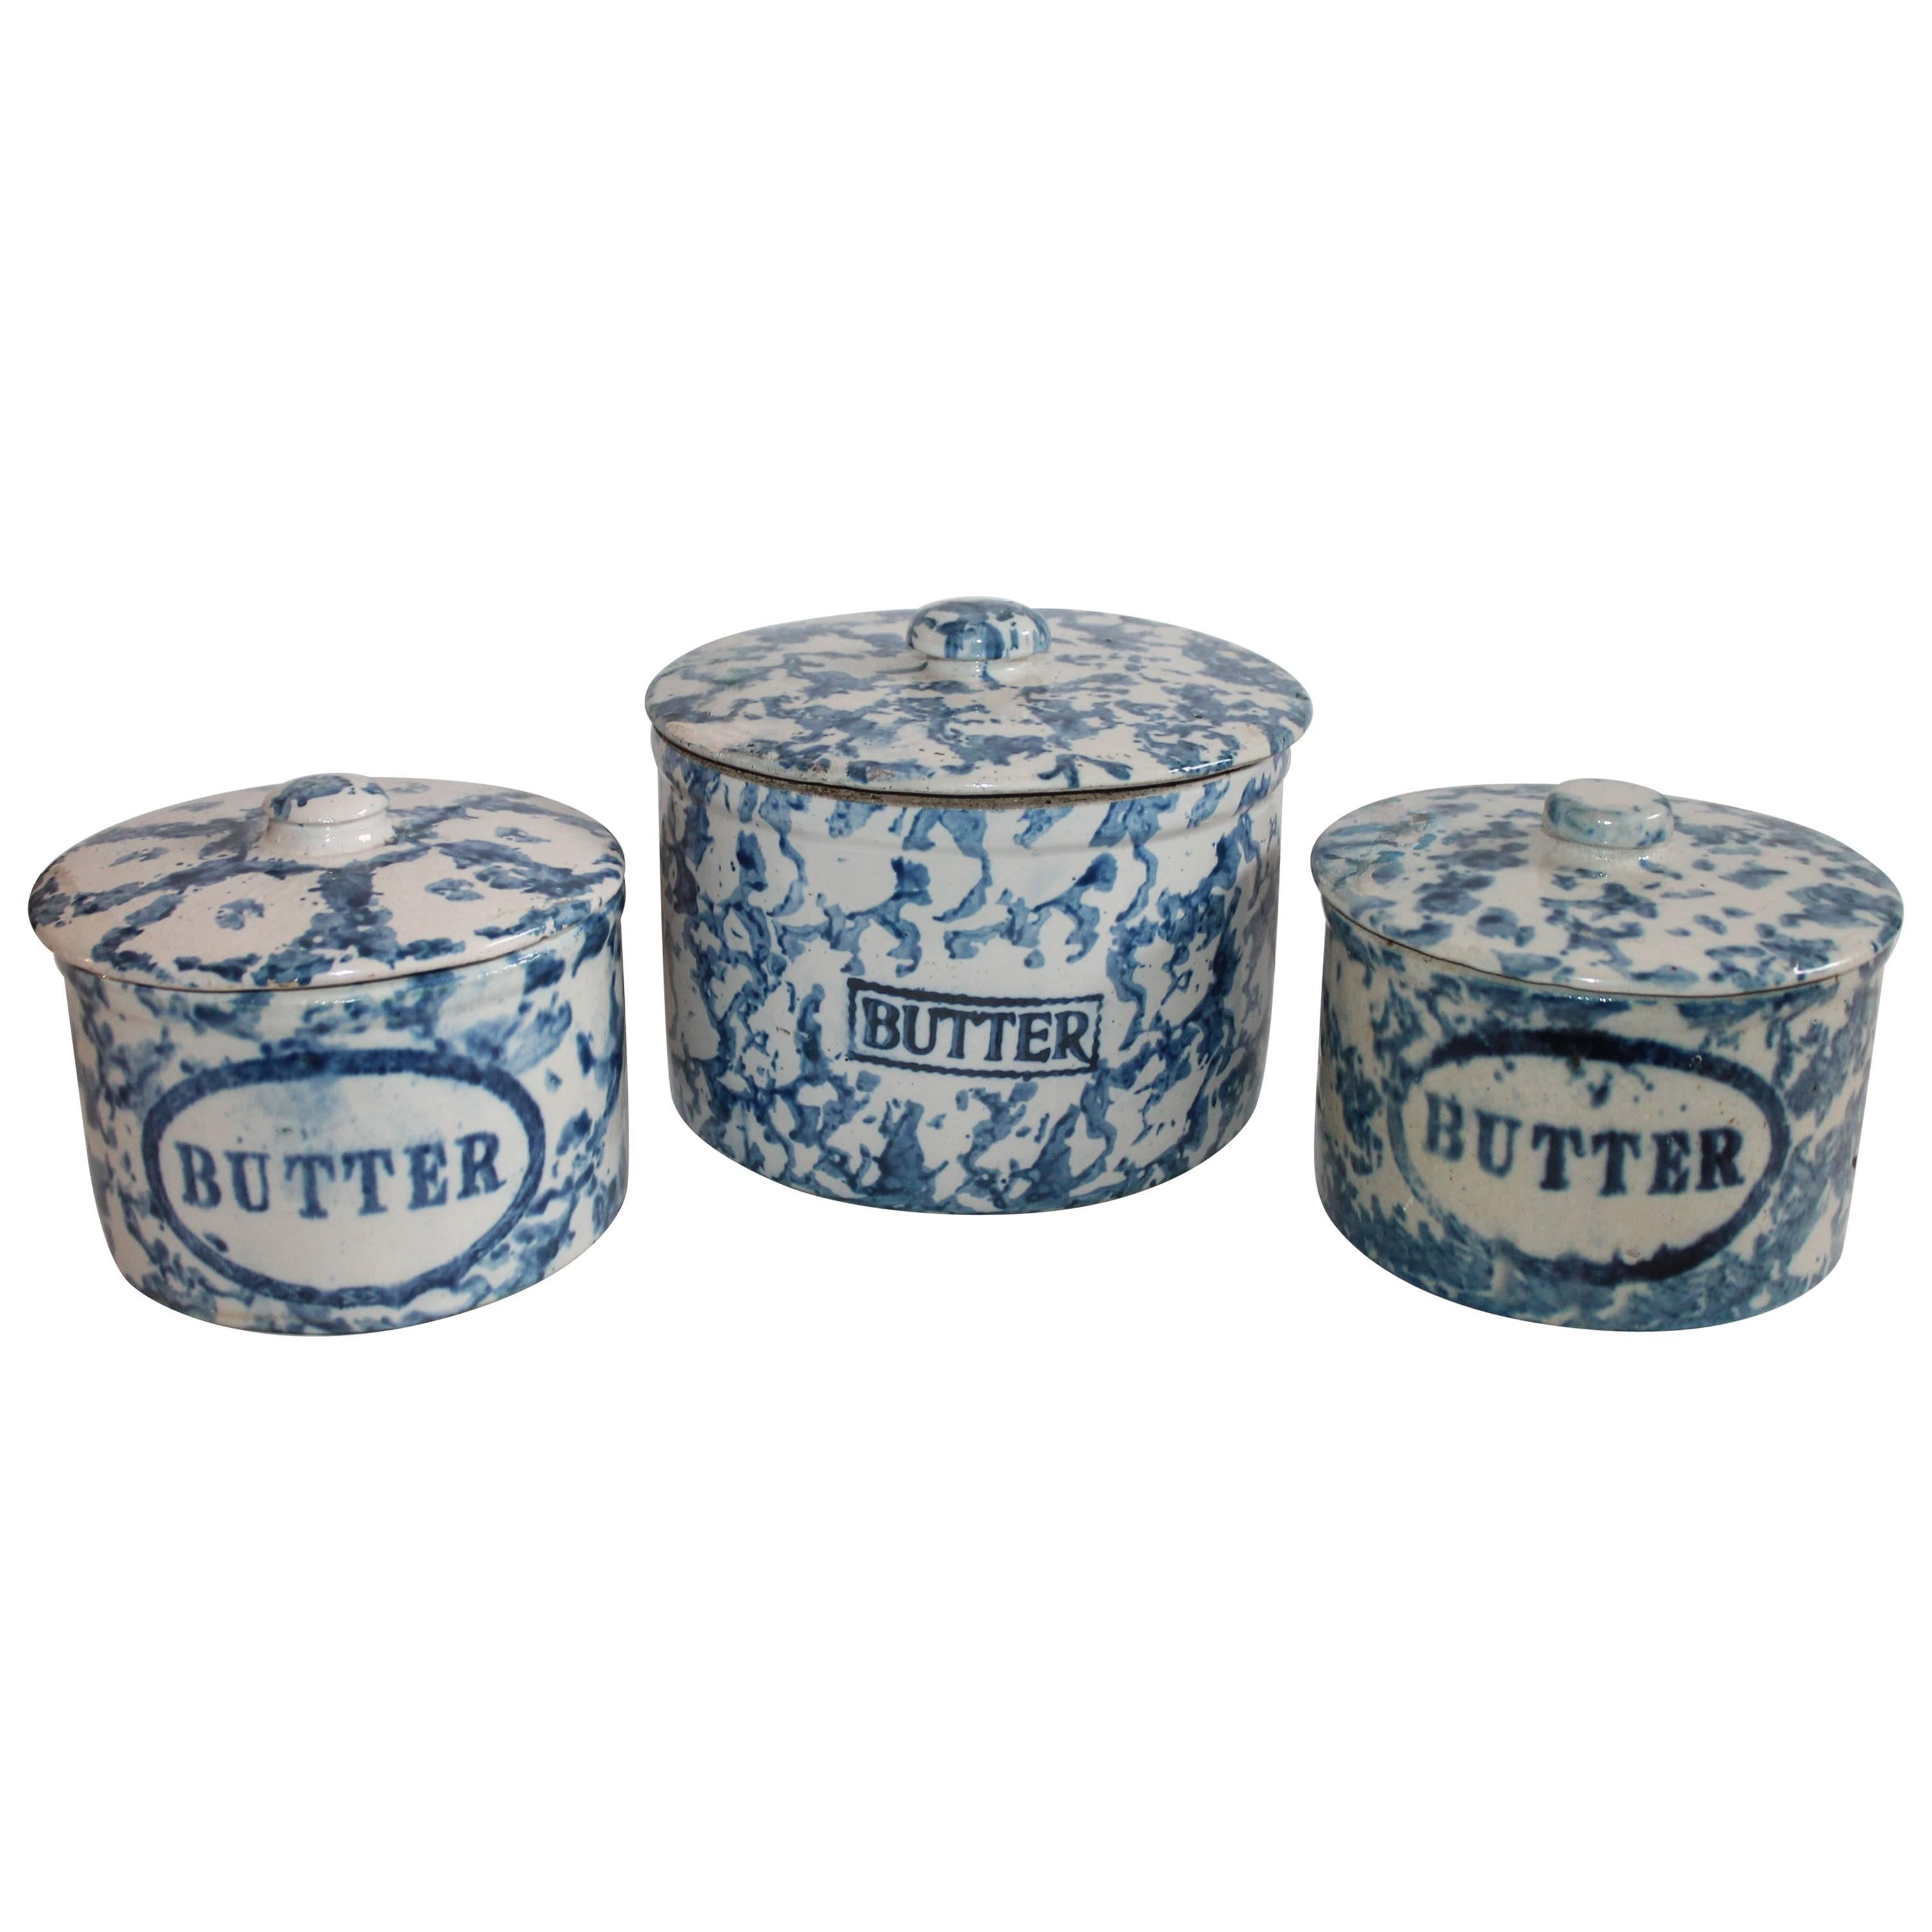 Collection of Three 19th Century Sponge Ware Pottery Butter Crocks For Sale